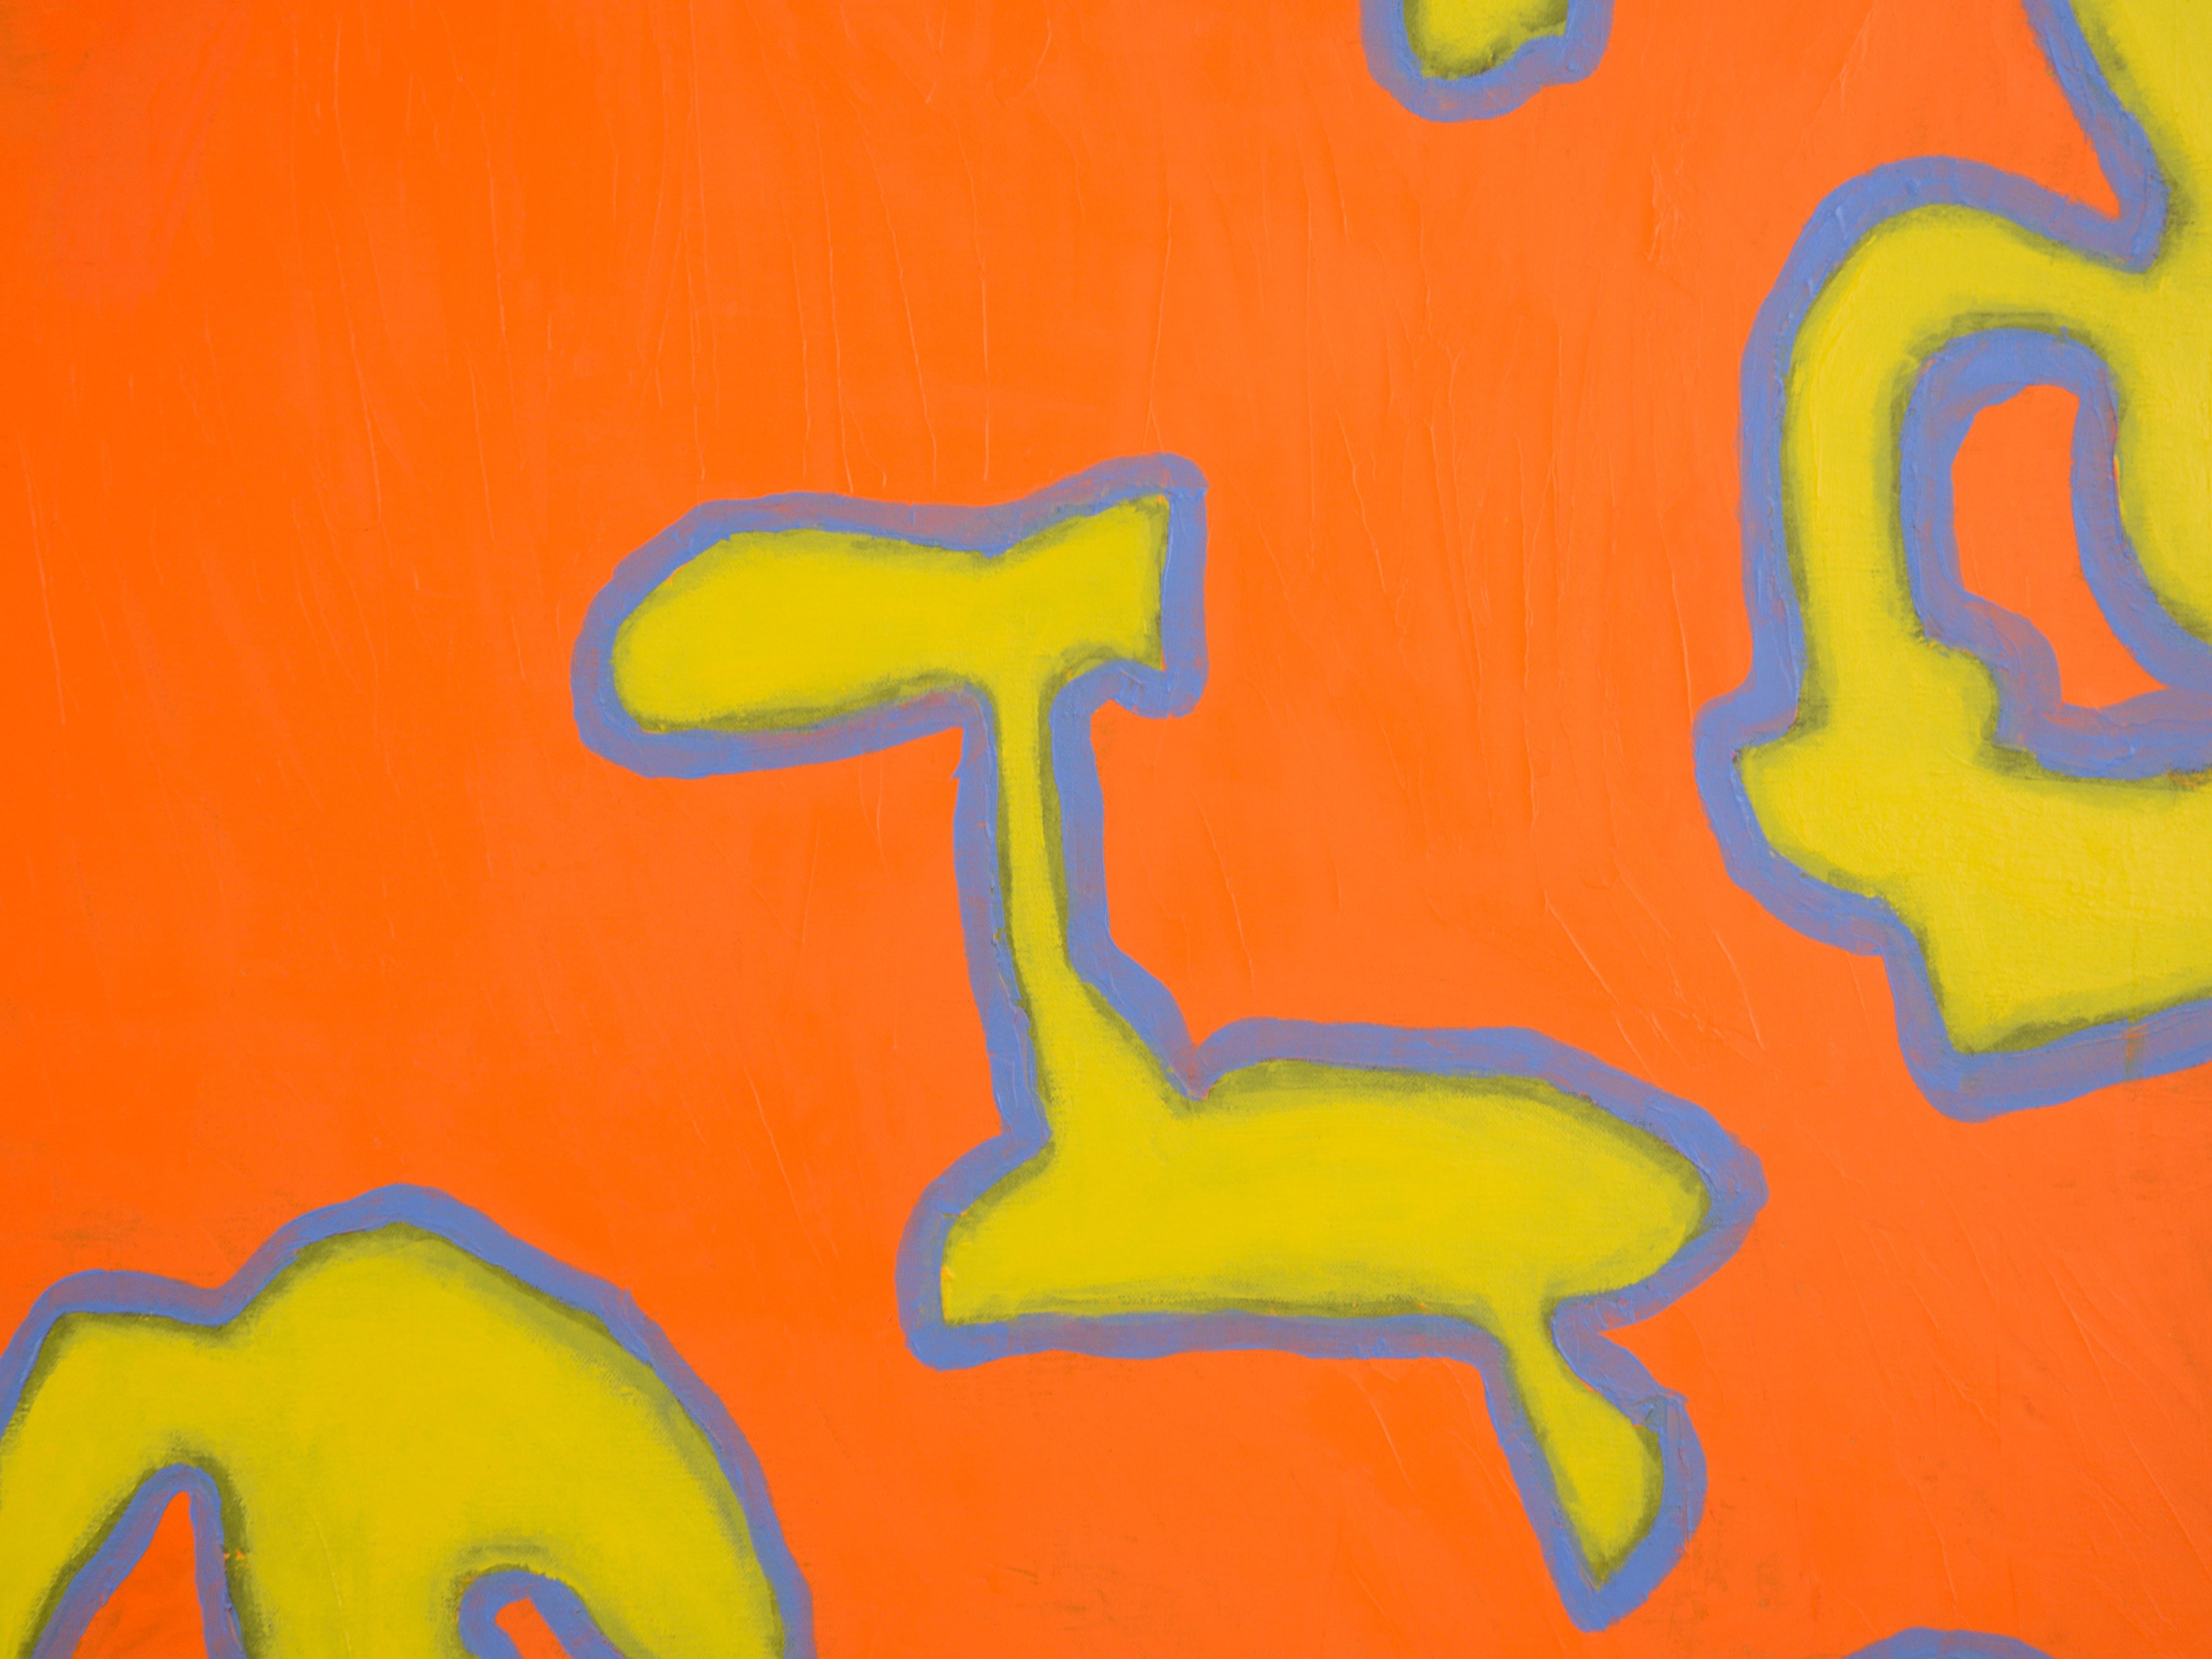 Large-scale abstract in orange of bold shapes by Bay Area artist Michael Pauker (American, b.1957). Unsigned, but was acquired with a collection of his work. Unframed. Image size: 60